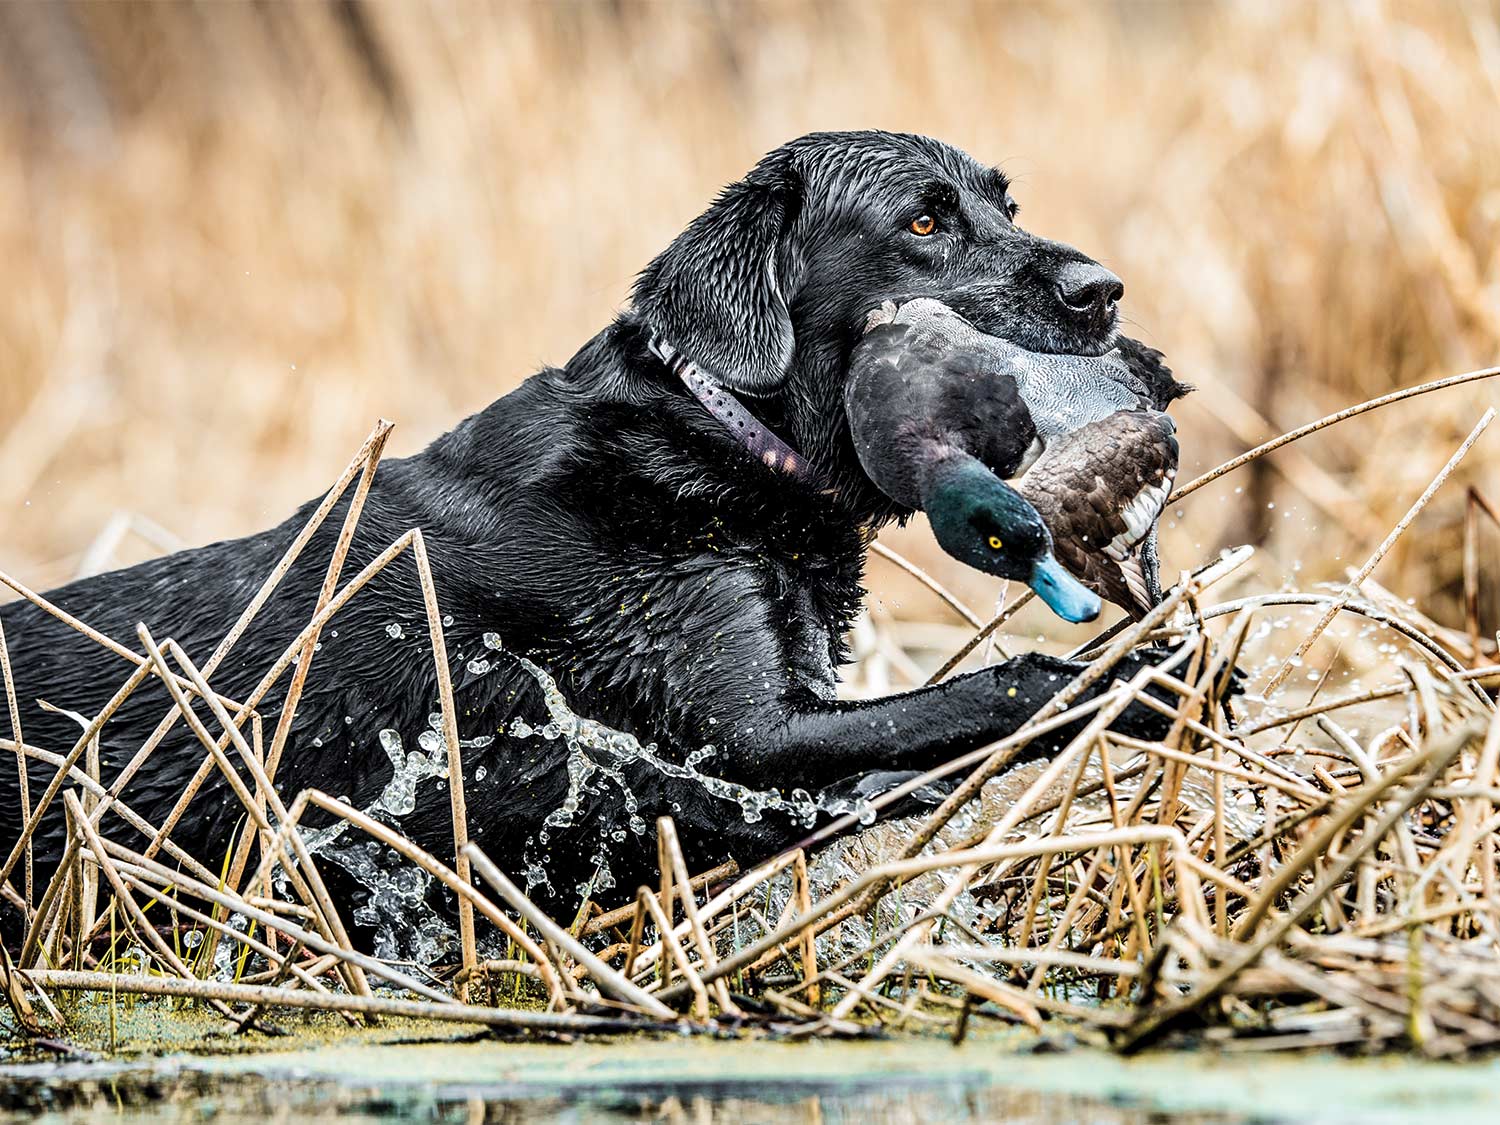 A black lab retriever holds a bluebill duck in its mouth as it returns from a retrieve in a lake.